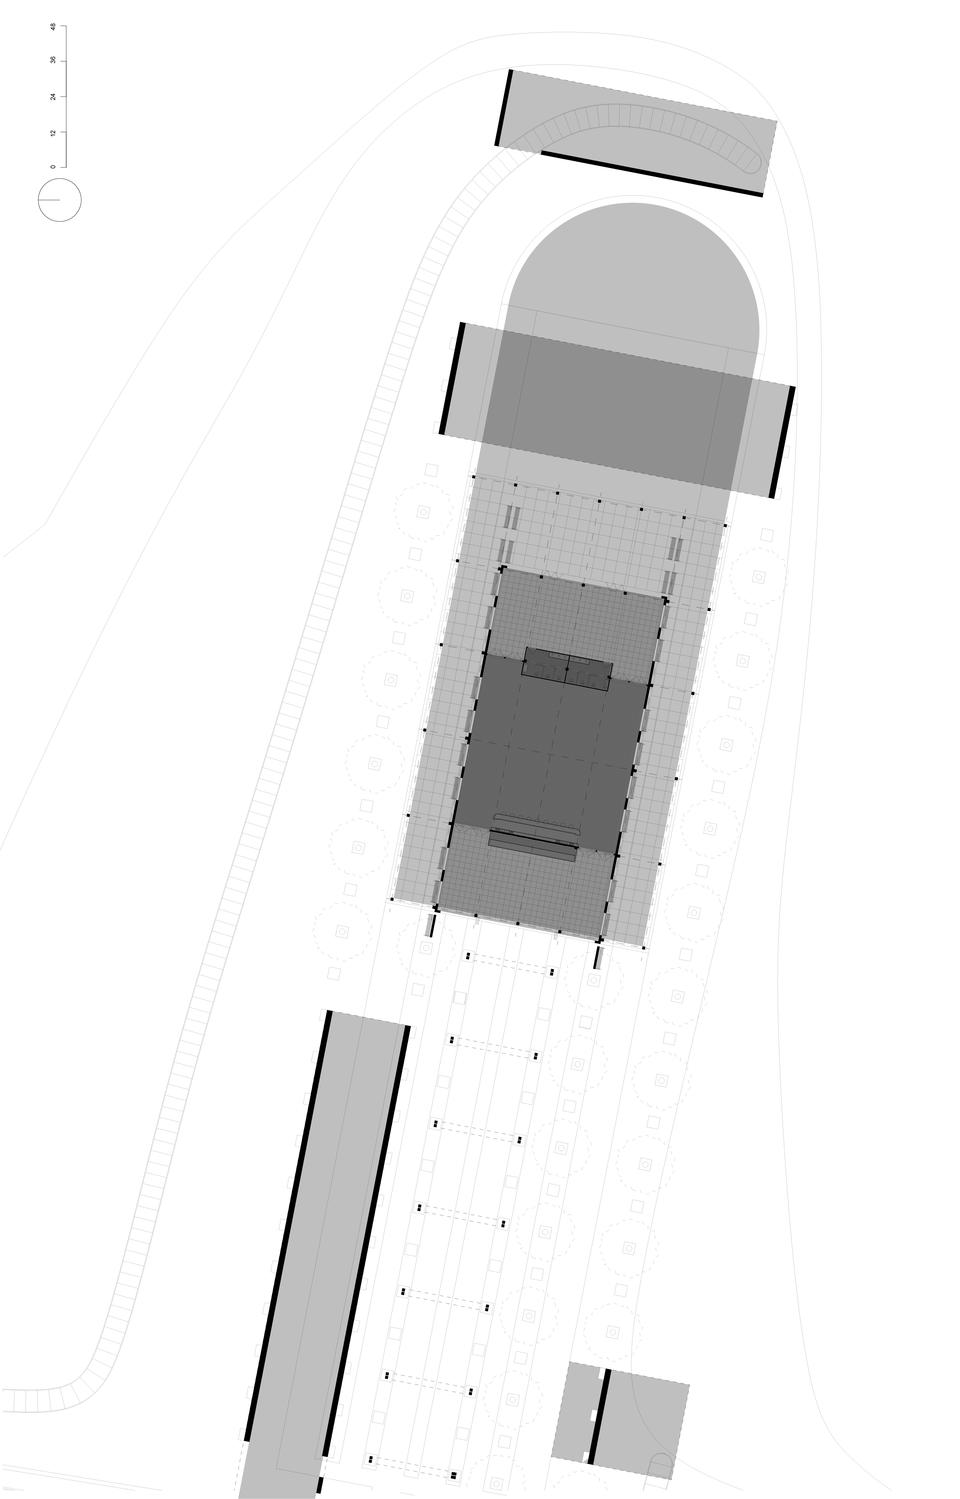 A diagram that shows a nesting of interior spaces for seasonal flexibility of the market / event space